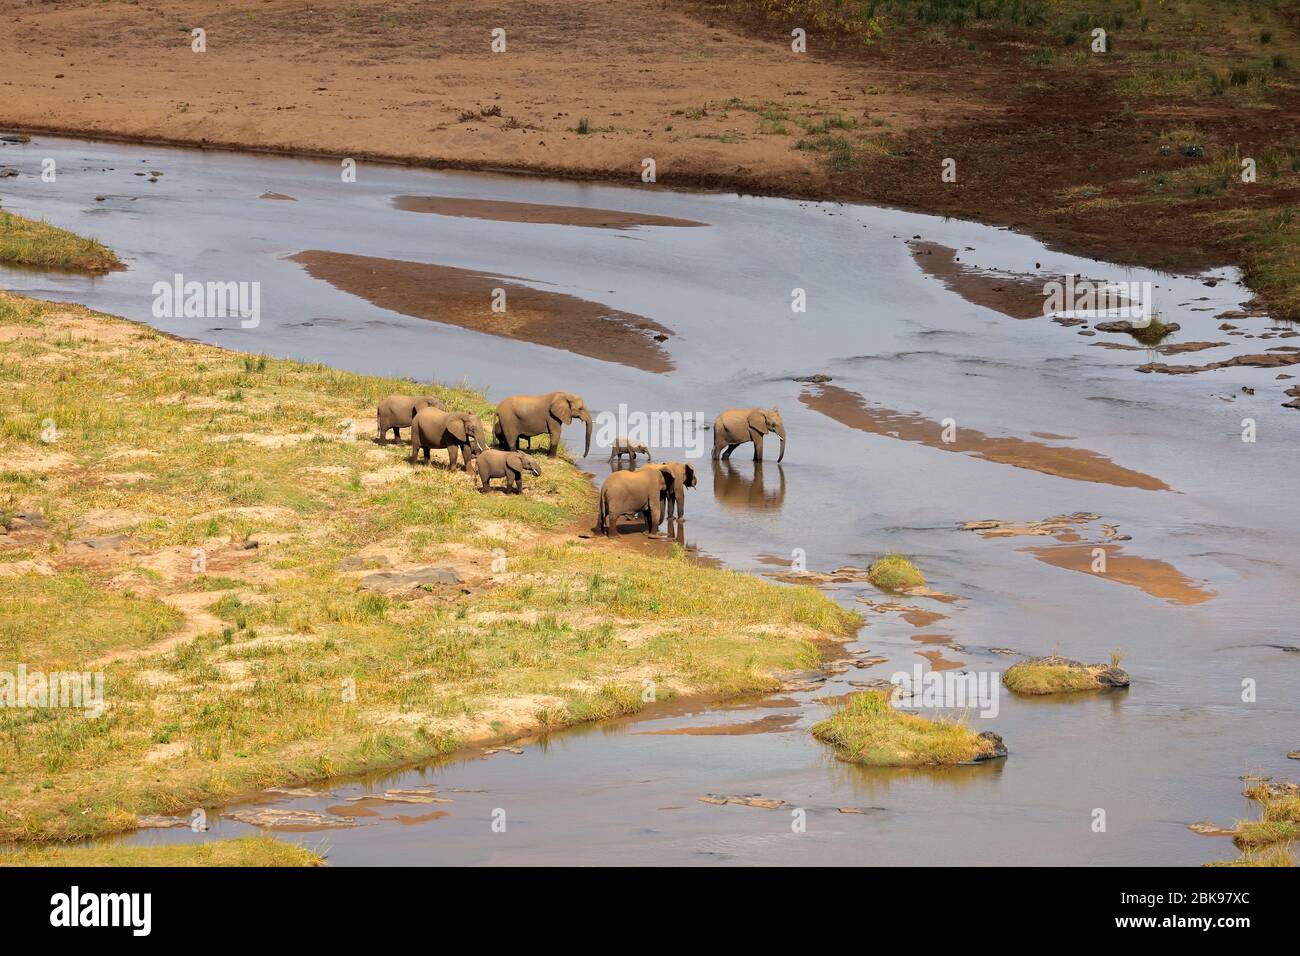 Small herd of African elephants crossing the olifants river, Kruger National Park, South Africa Stock Photo